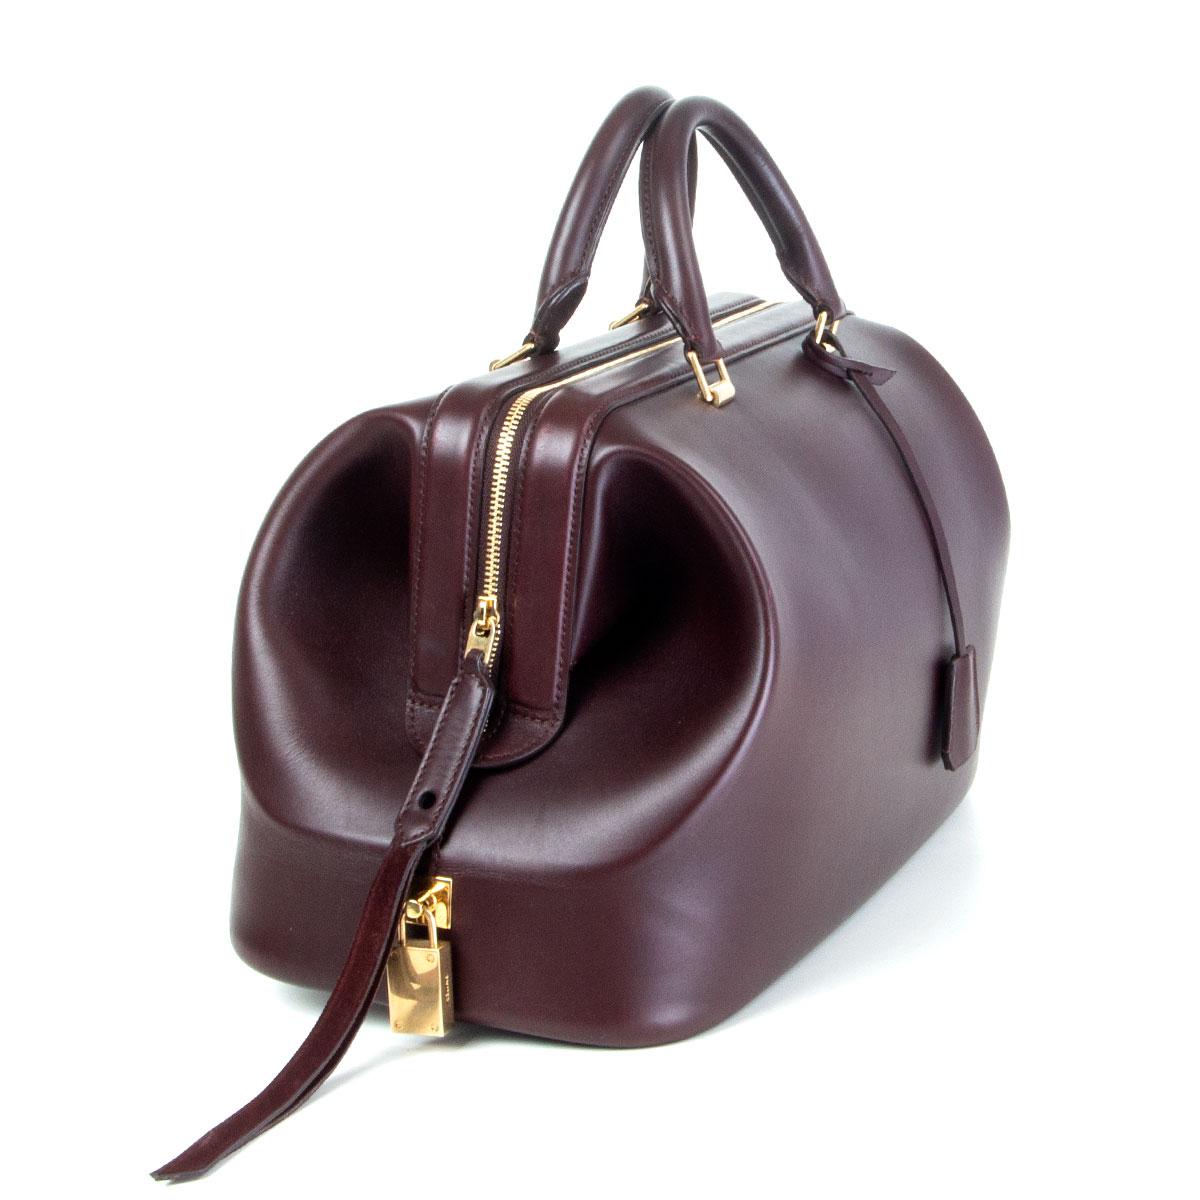 authentic Céline Frame Doctor Small handbag in deep burgundy calfskin. Opens with a zipper on top and is lined cognac calfskin with one open pocket against the back and six small open pockets against the front. Has been carried and is in excellent